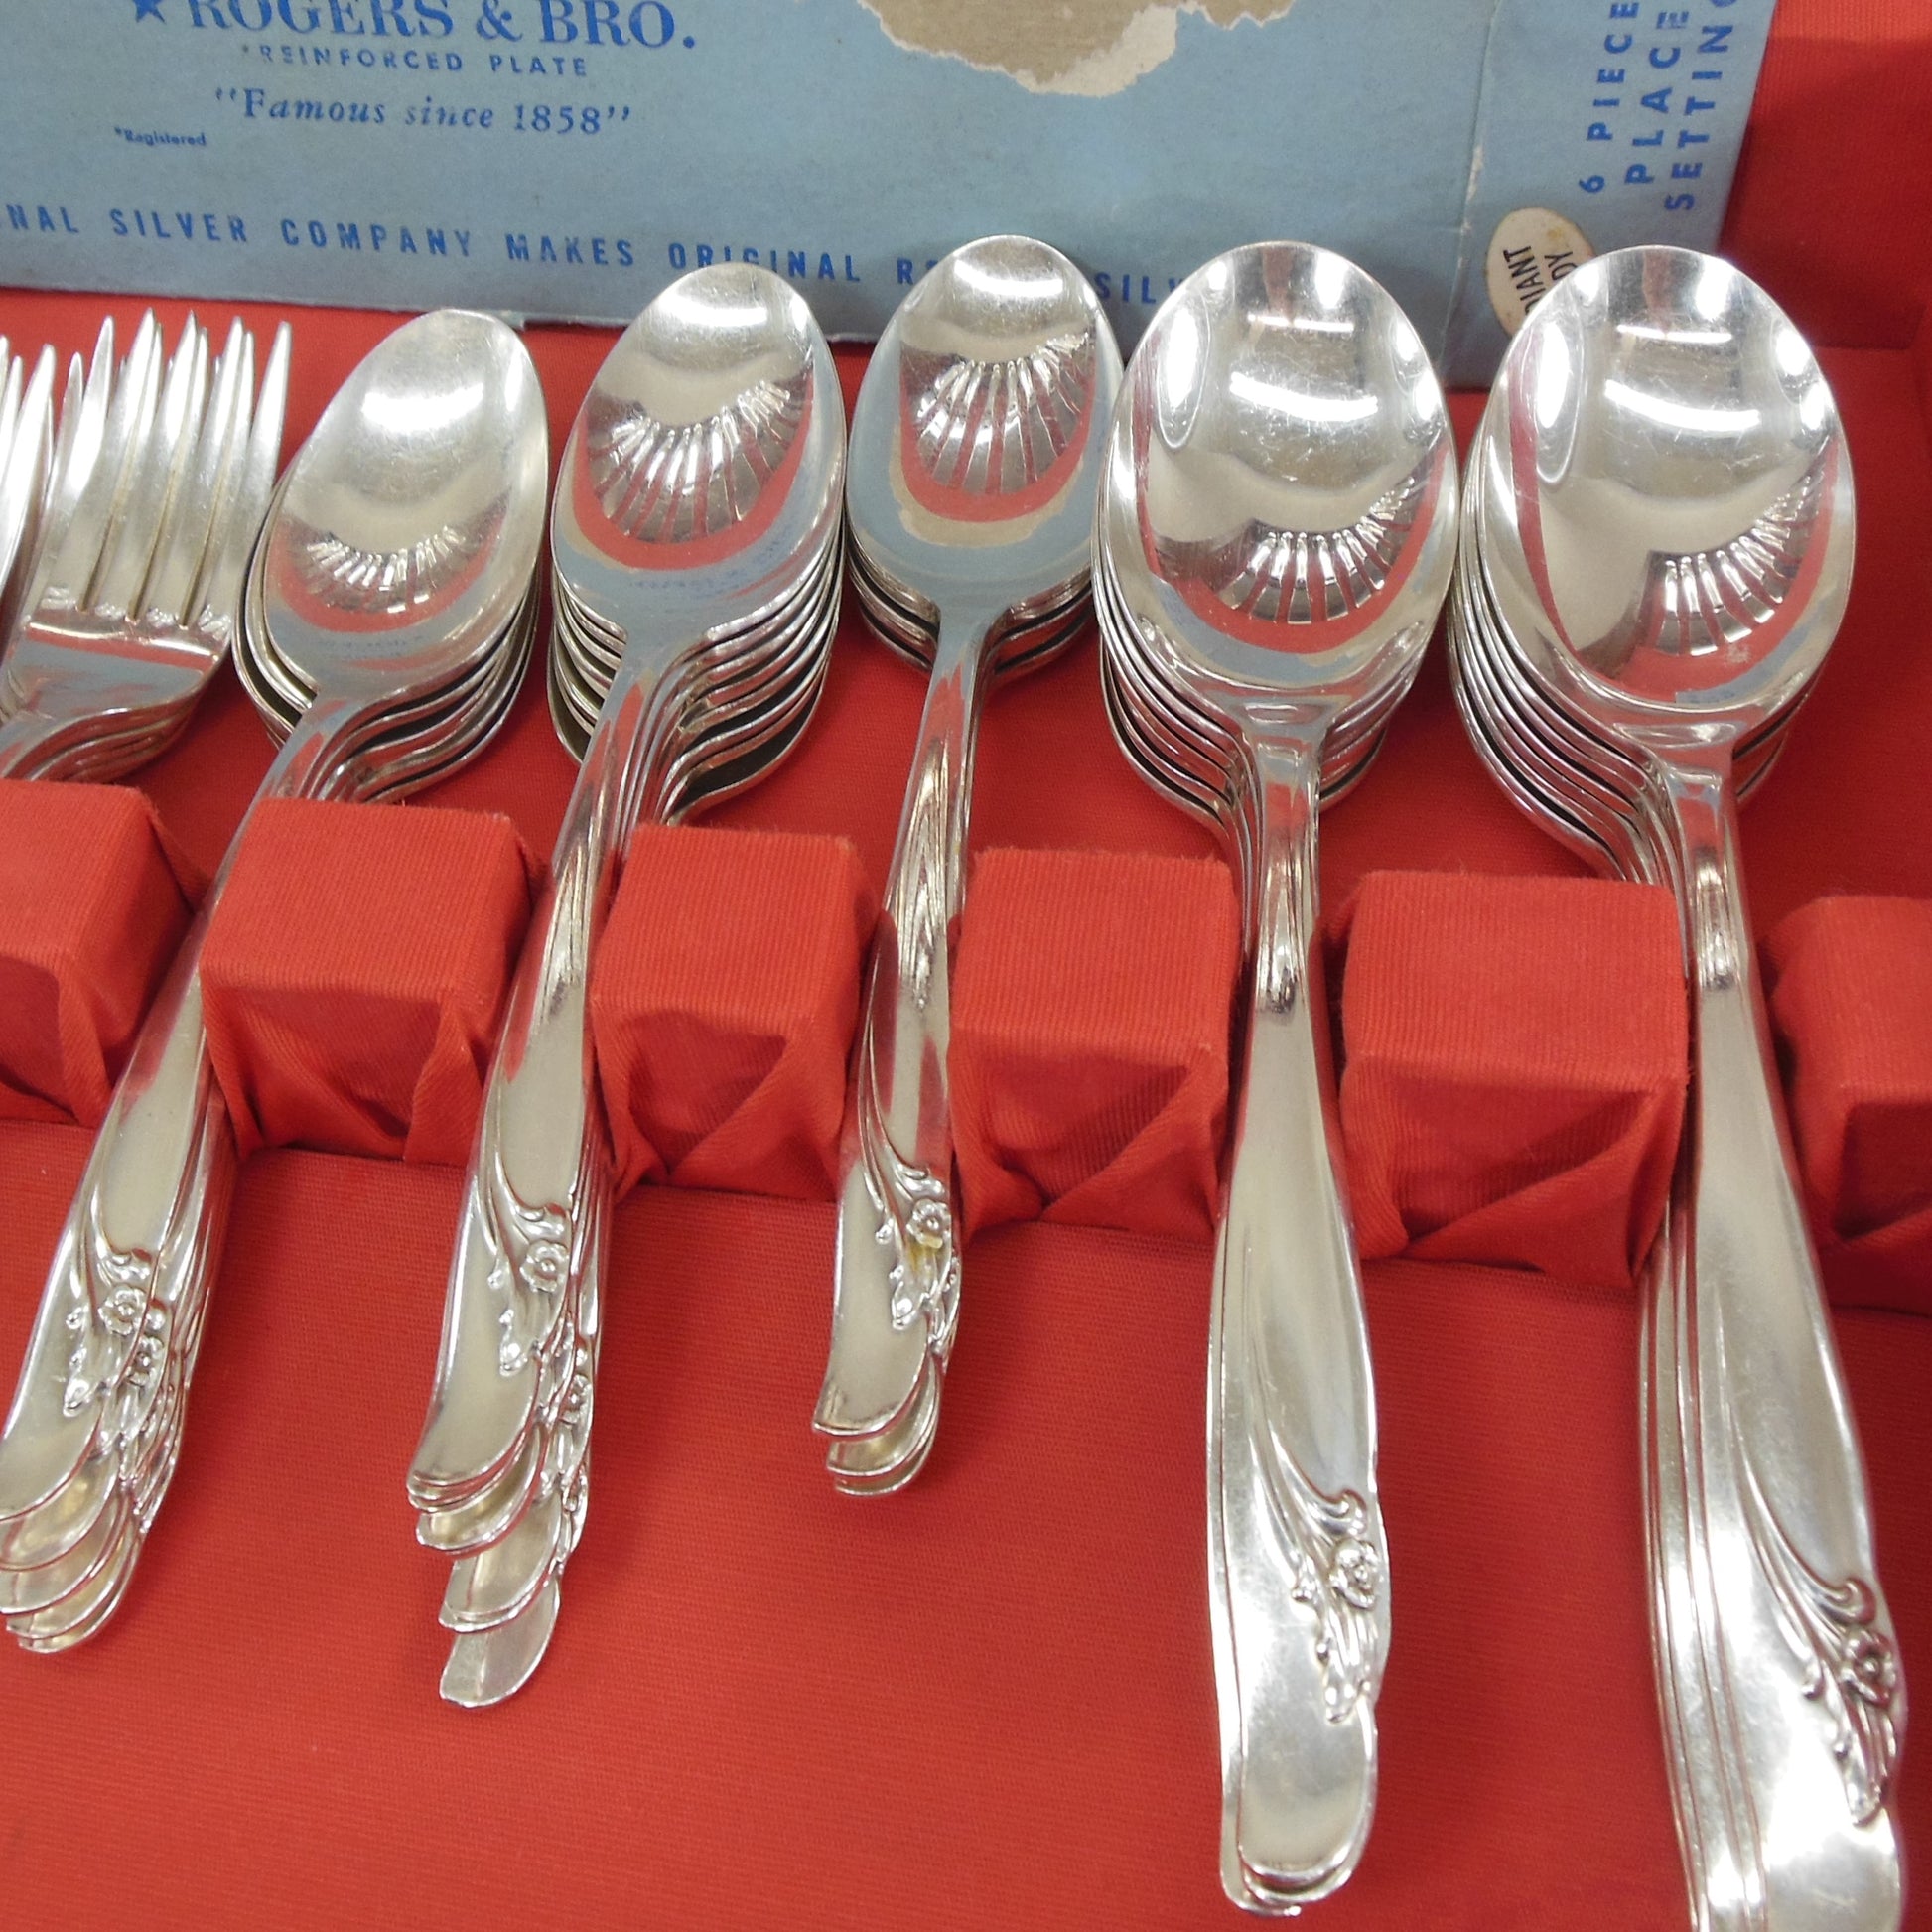 Rogers & Bros. 1957 Exquisite Radiant Lady Silverplate Silverware Set - Service for 12 Used 70 pieces